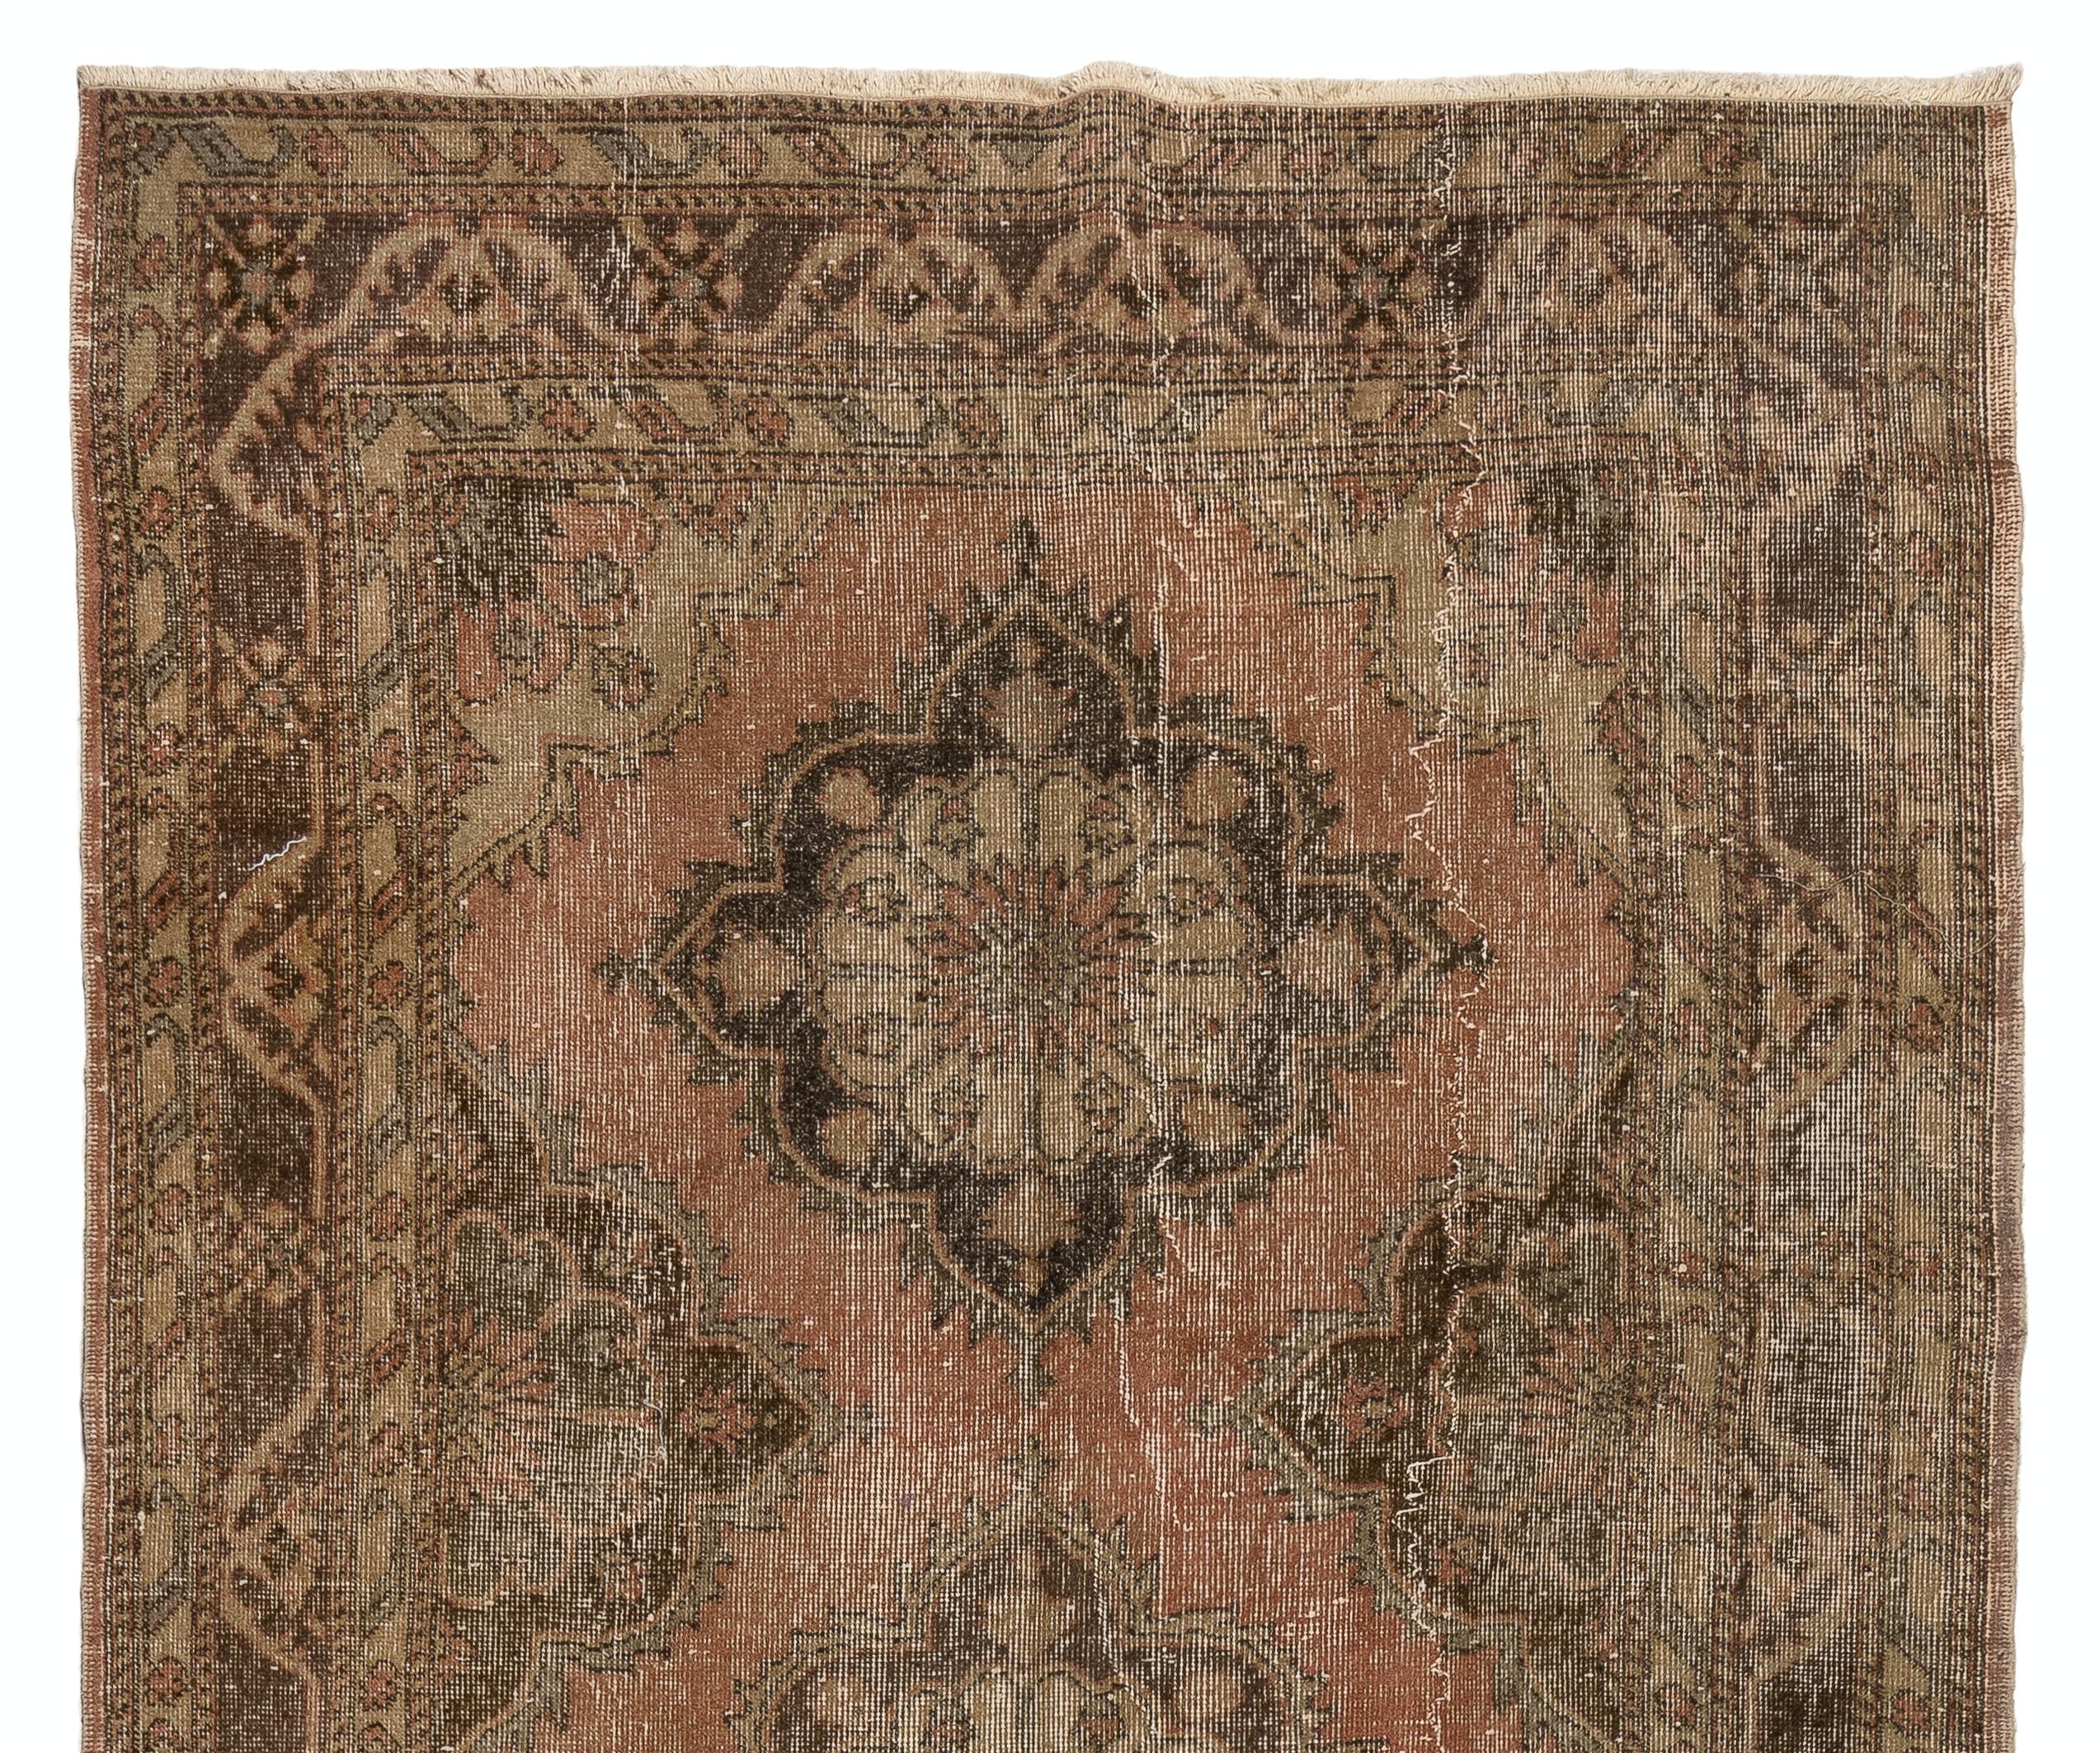 A  vintage Turkish runner rug for hallway decor in brown, fawn and faded dark coral pink. It was hand-knotted in the 1960s with low wool on cotton foundation and features a multiple medallions design. It is in very good condition,